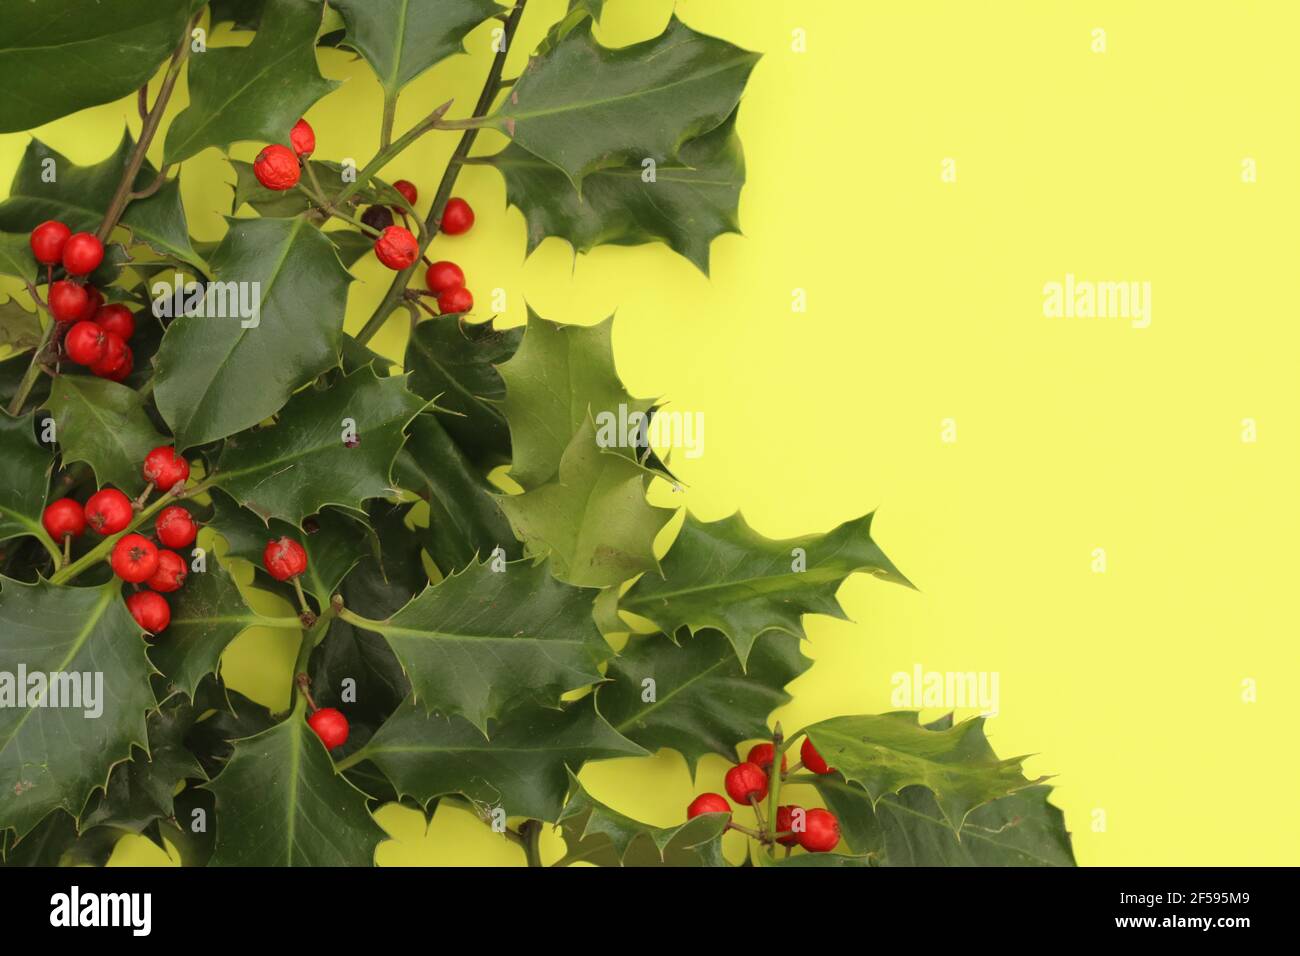 Holly and berries on yellow background, bourder Stock Photo